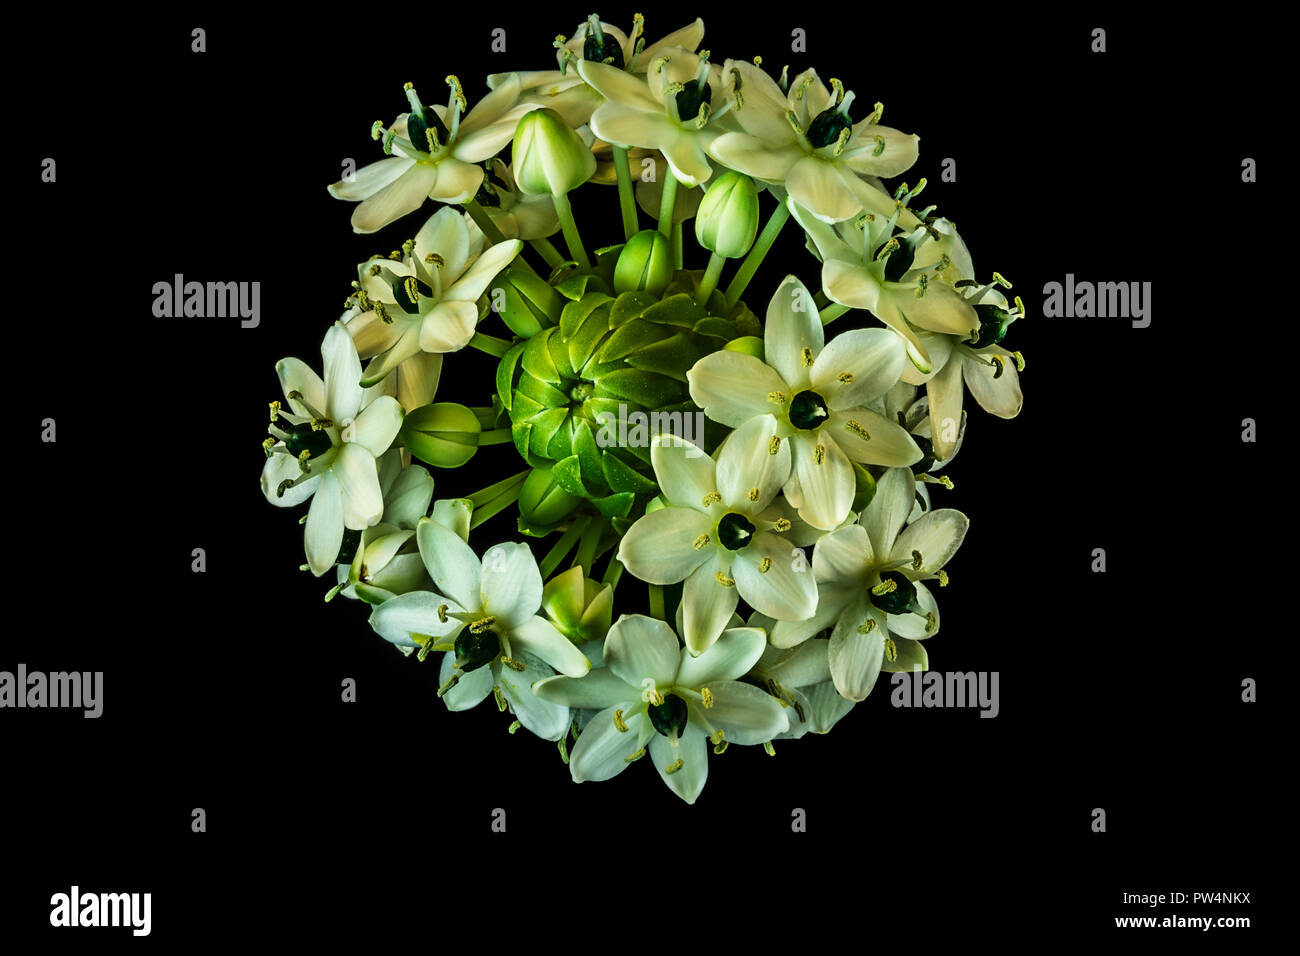 A Star of Bethlehem flower with black background Stock Photo